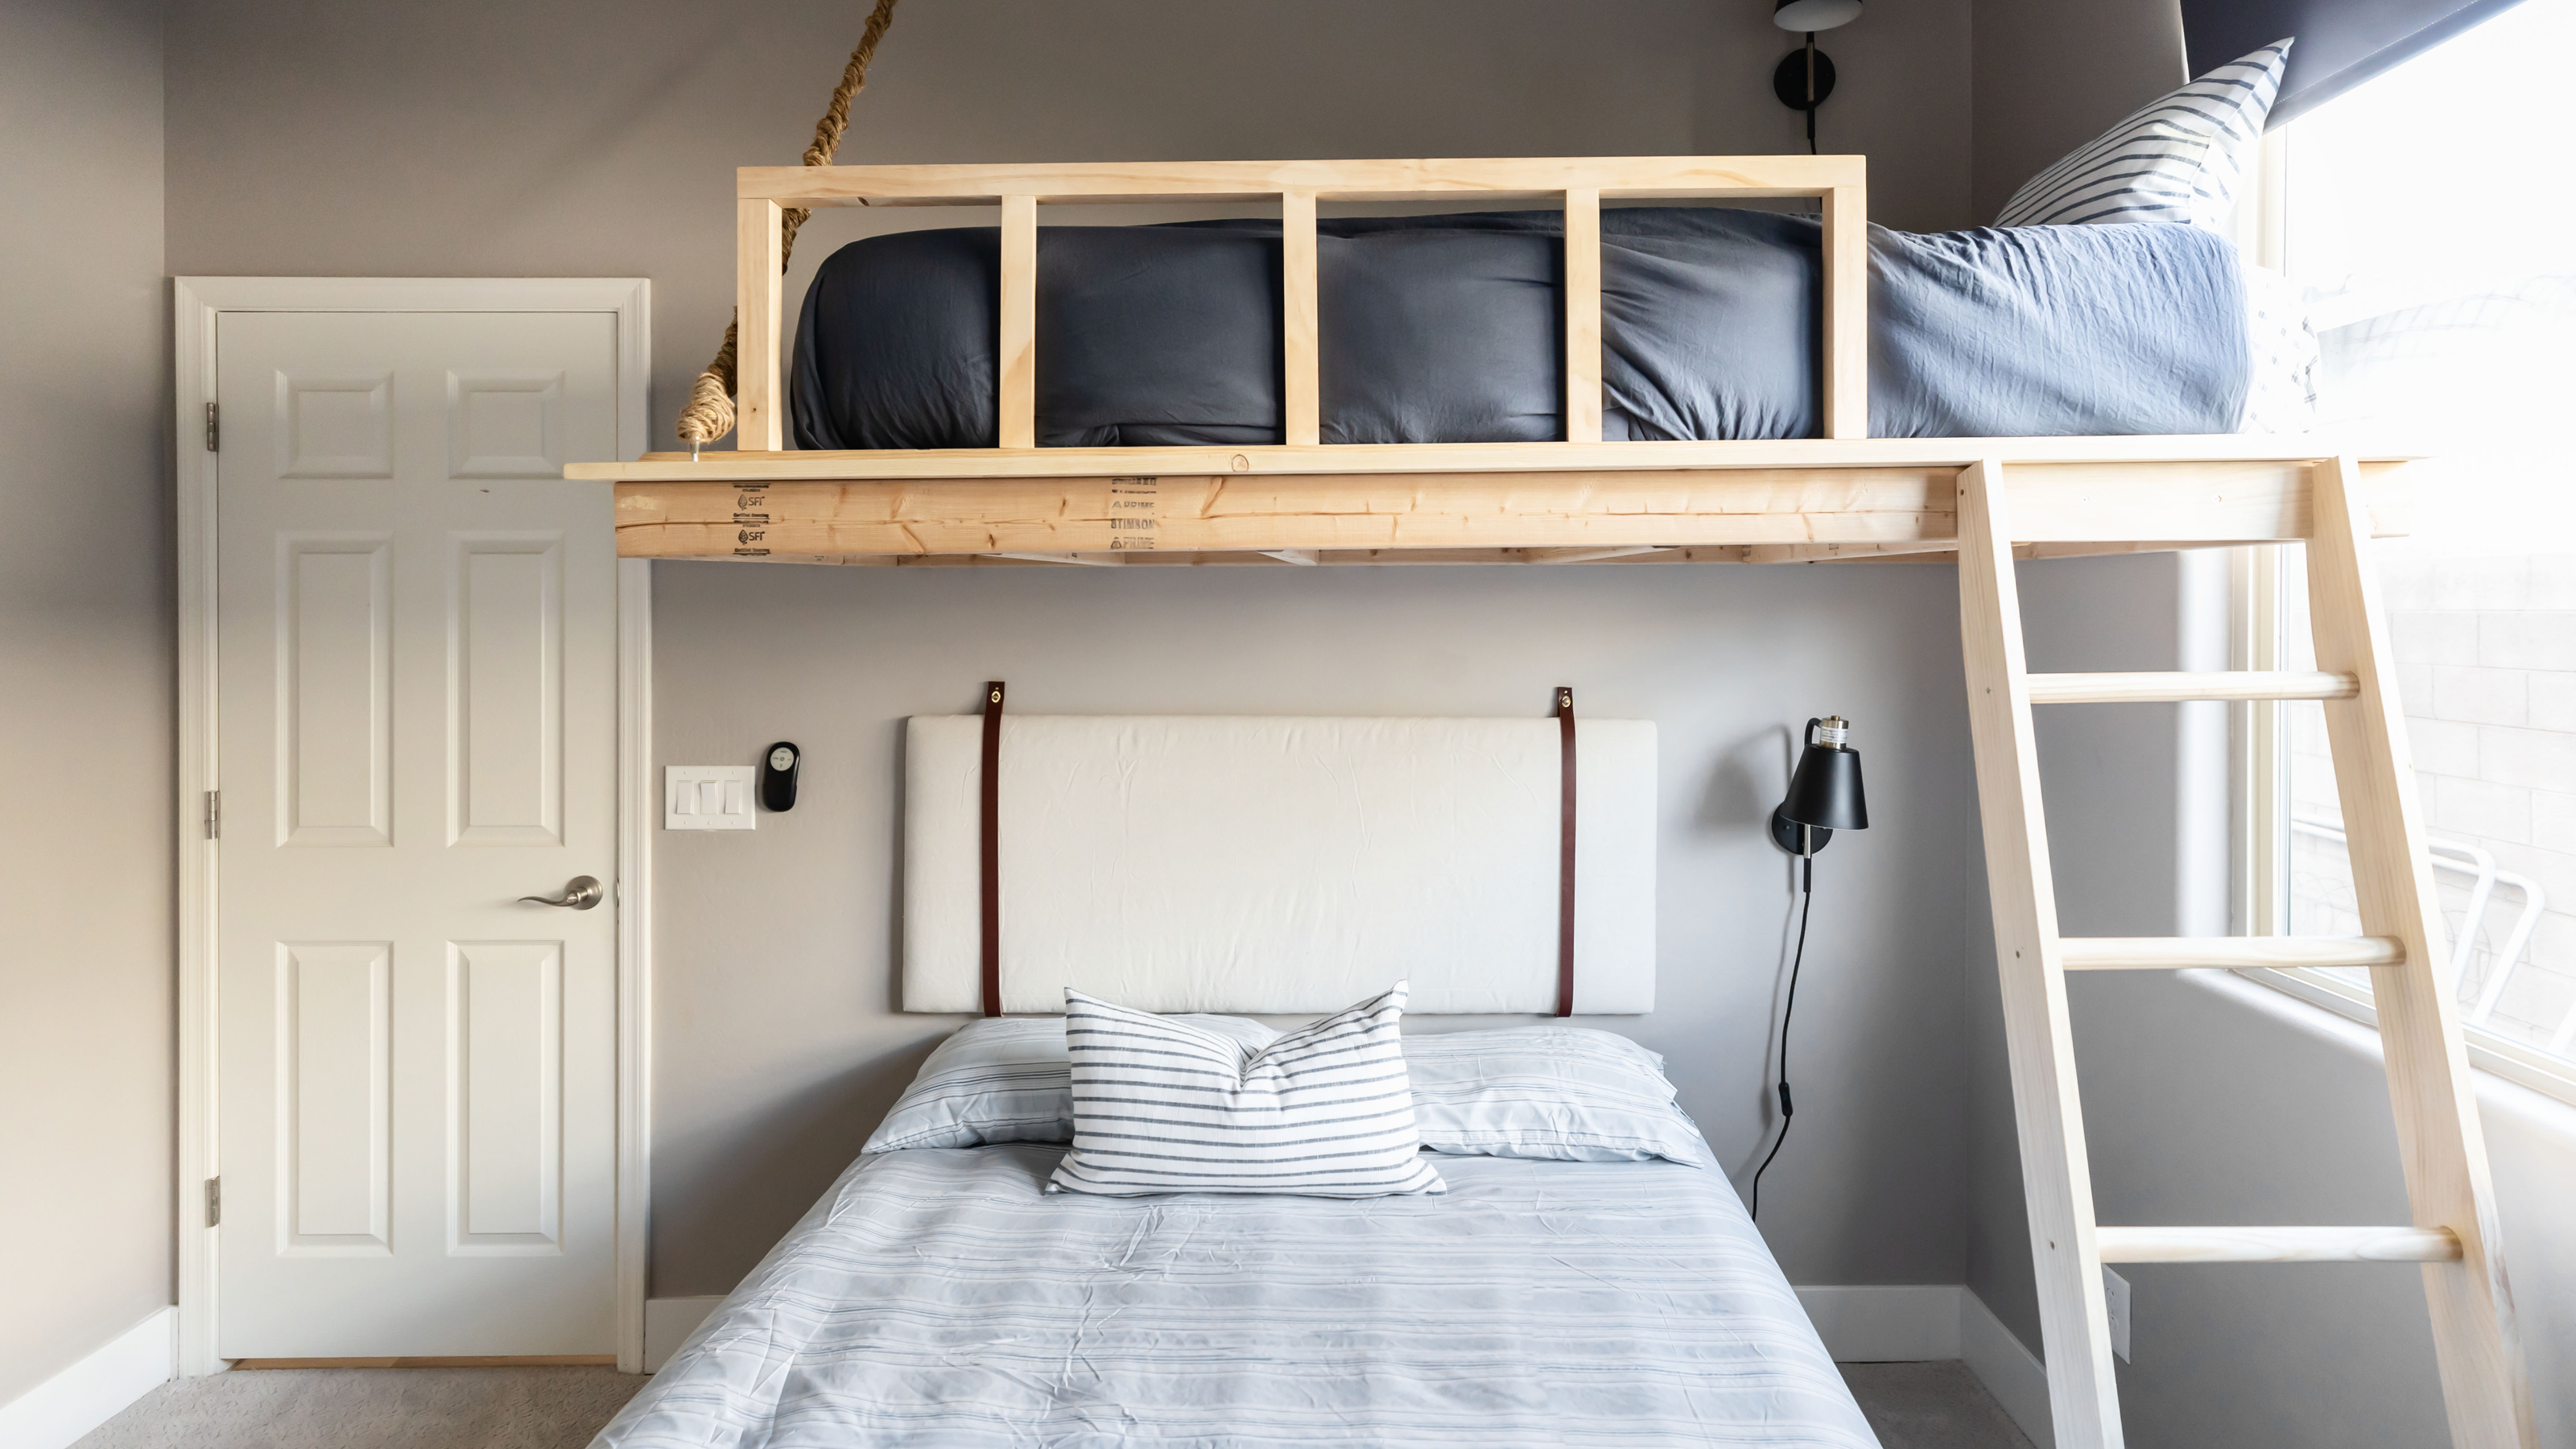 How To Build A Loft Bed Diy With This, Do It Yourself Built In Bunk Beds